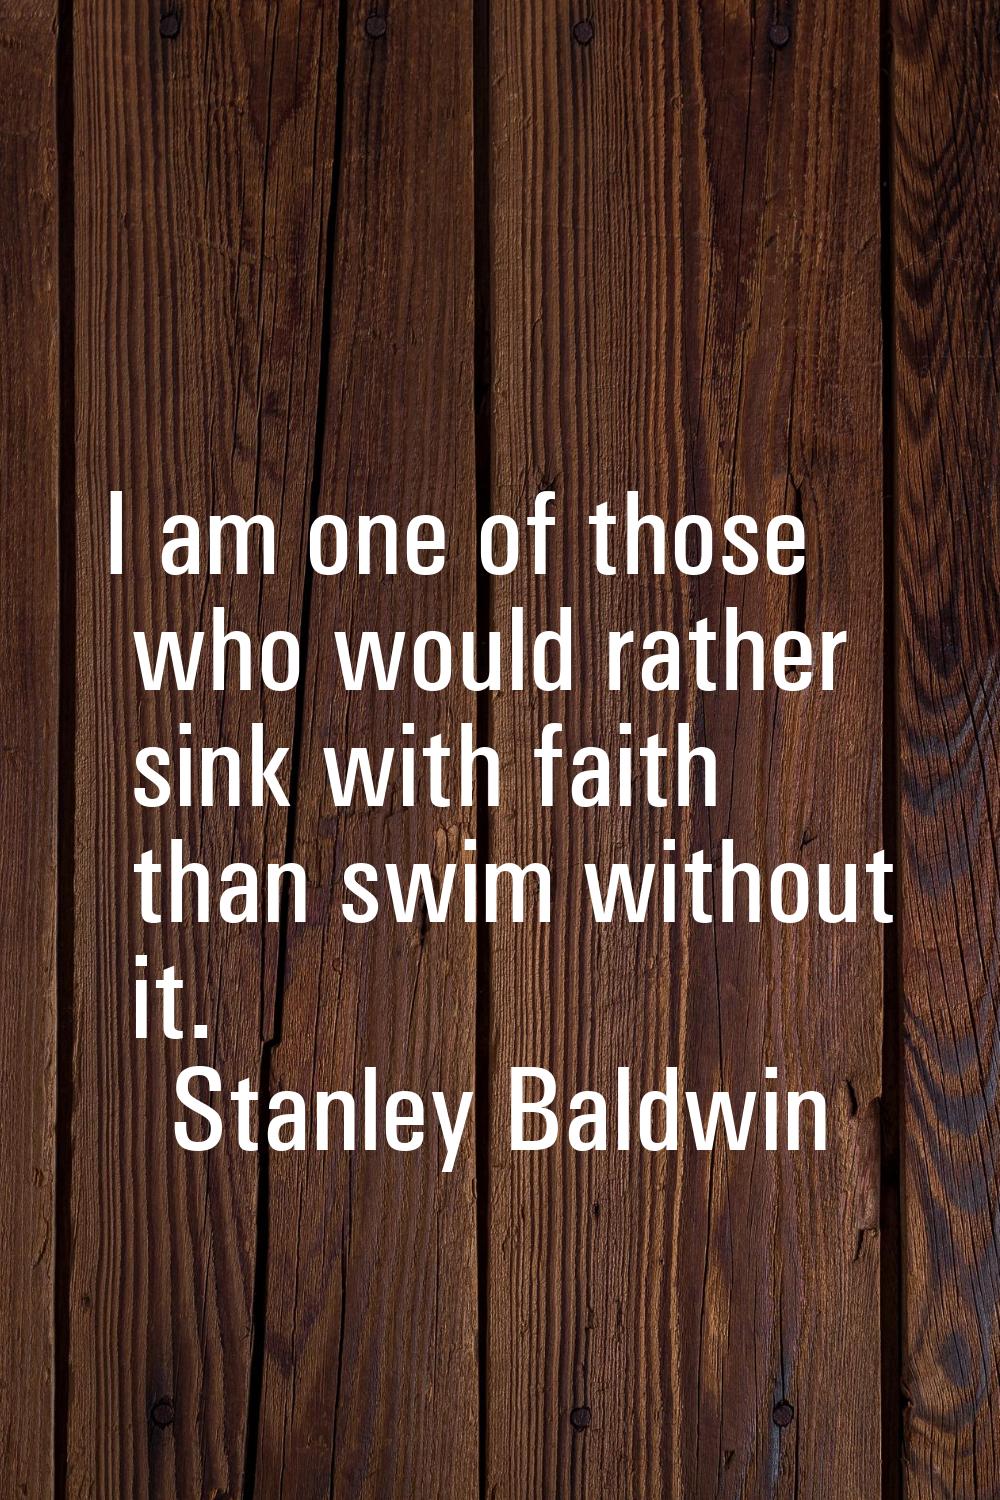 I am one of those who would rather sink with faith than swim without it.